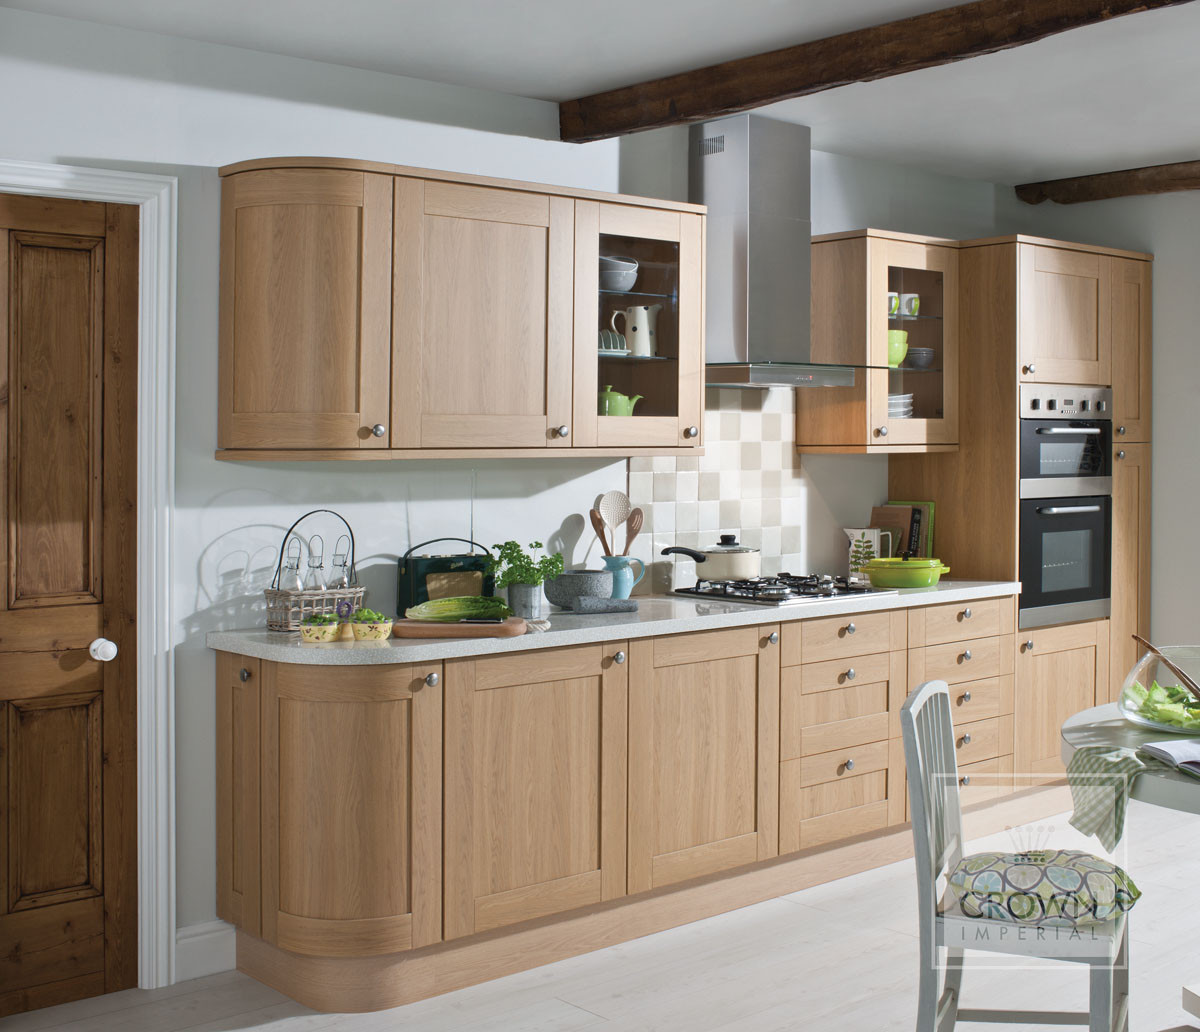 Small Kitchen Pictures
 Three top tips for small kitchen design